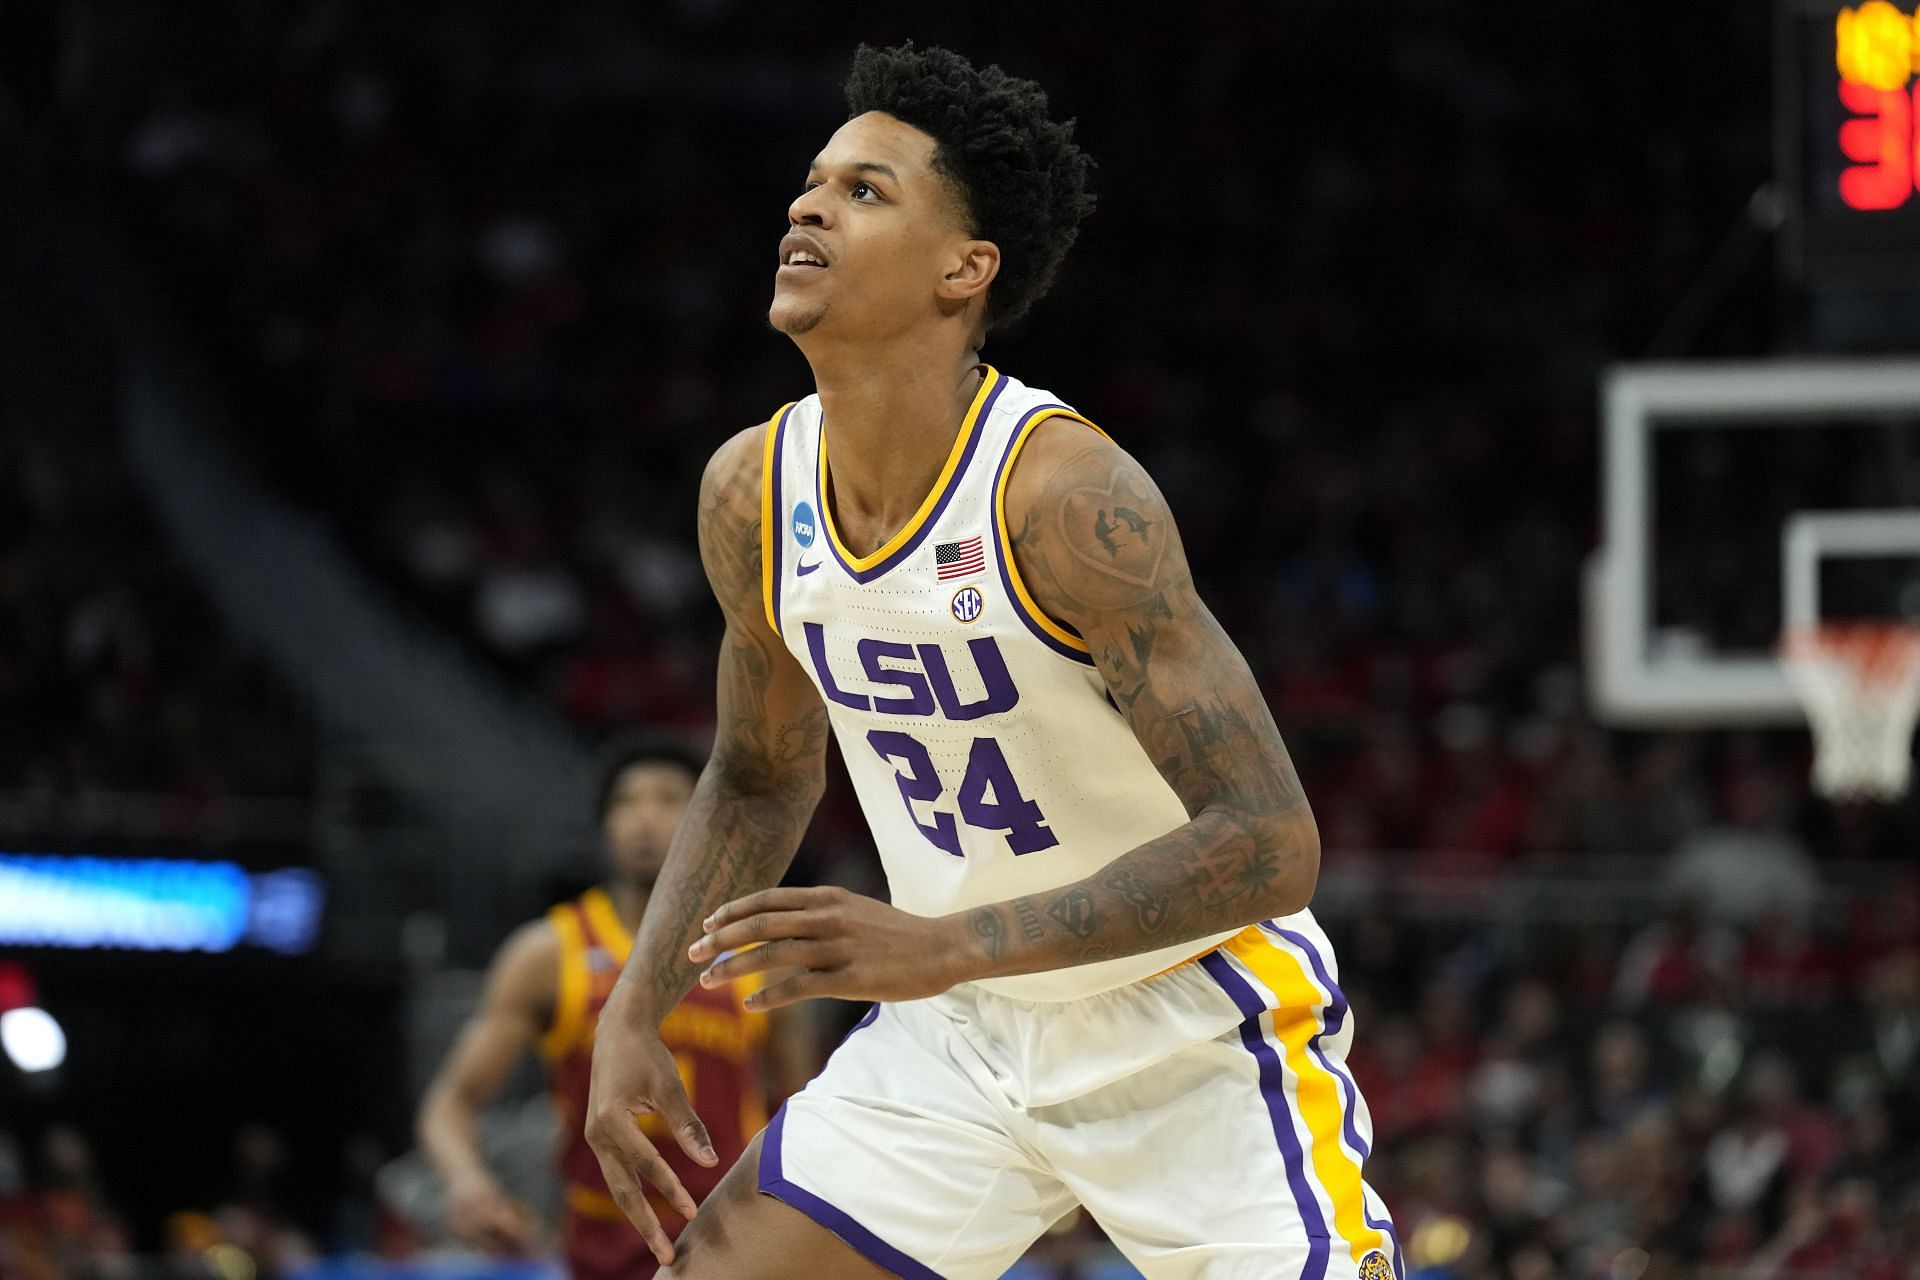 Shareef O'Neal says he butted heads with father Shaq over entering